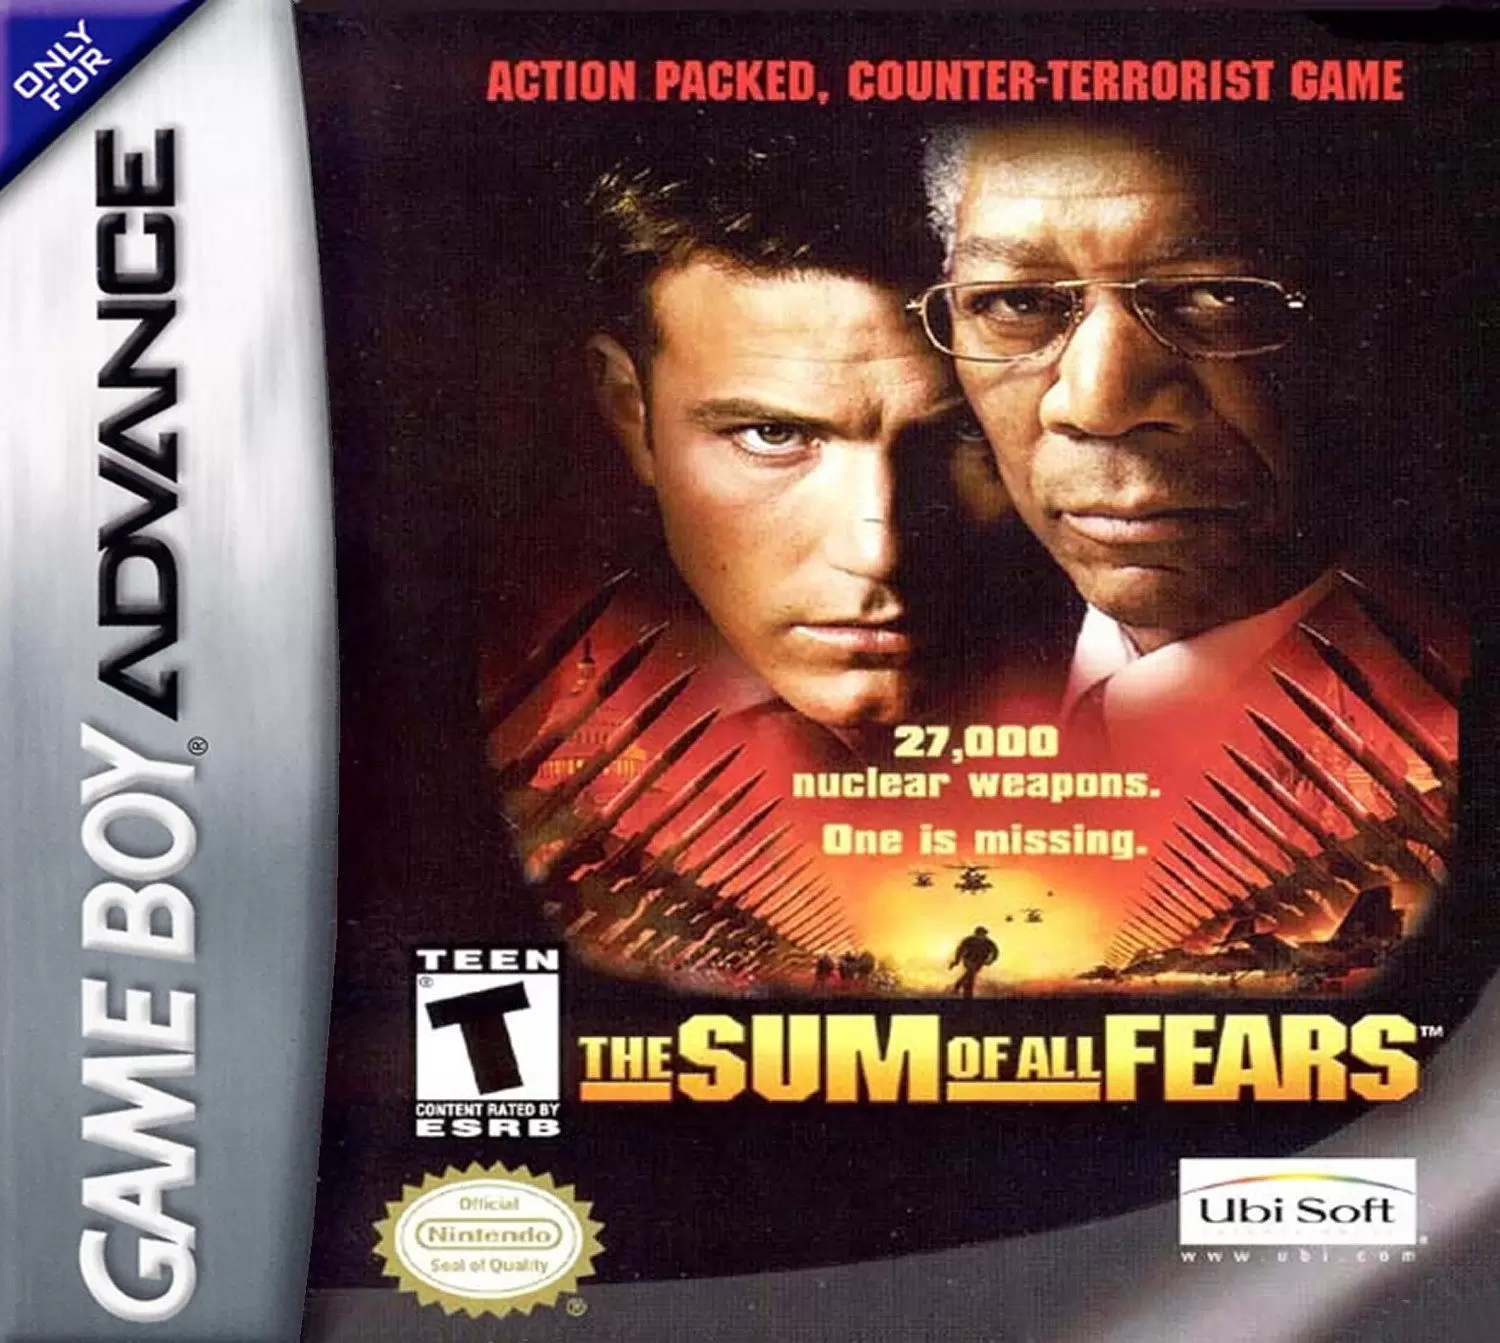 Game Boy Advance Games - The Sum of All Fears